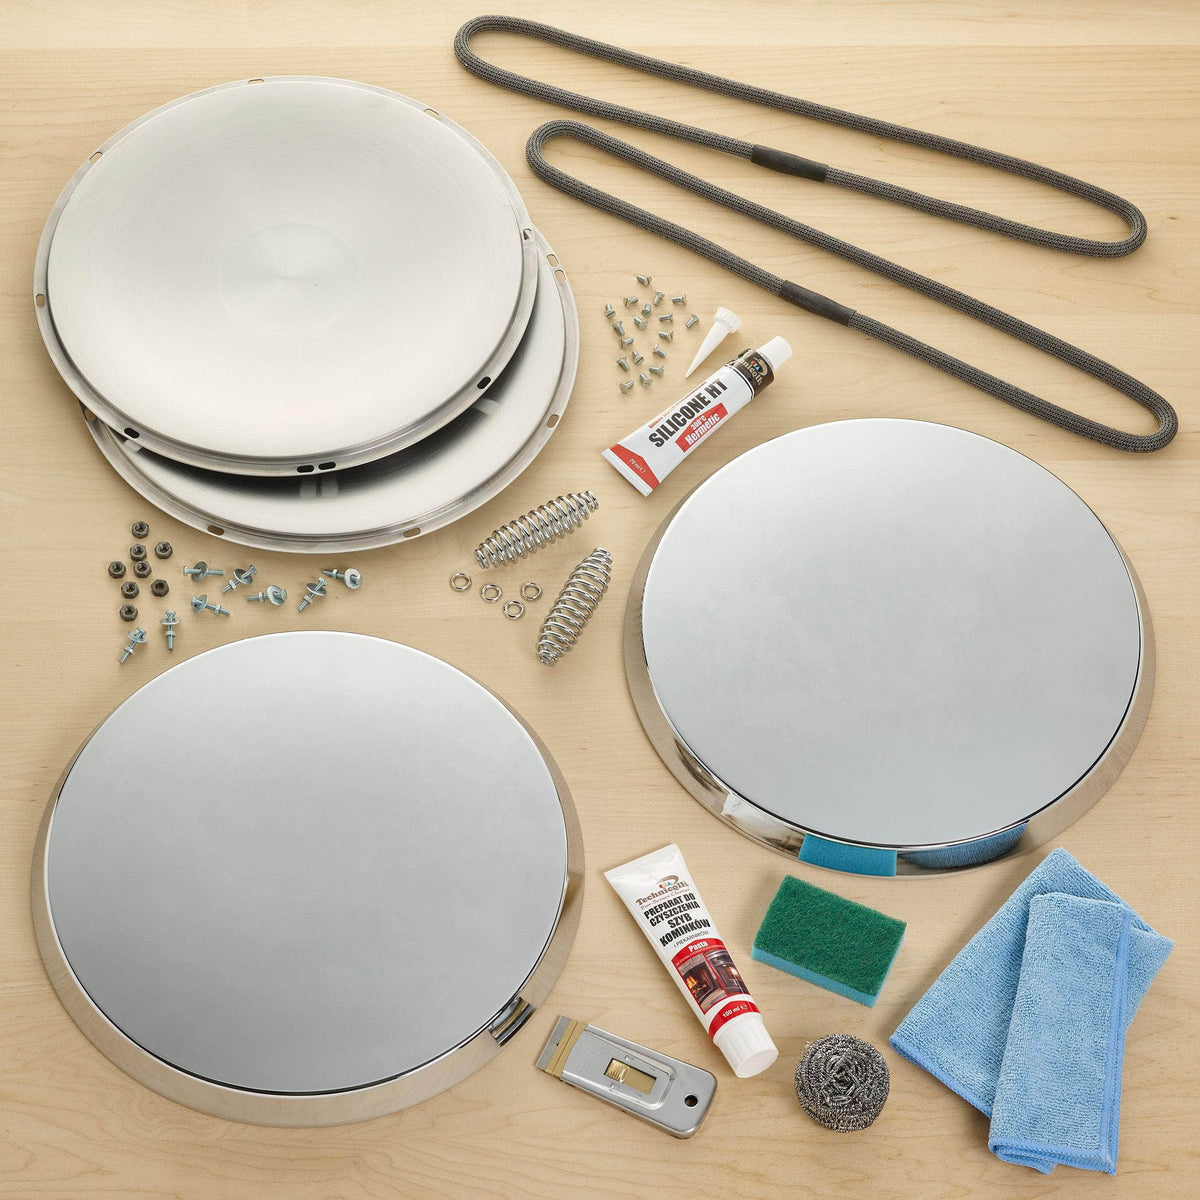 Complete Stainless Steel Lid Refurb Kit for use with Aga range cookers Shallow chrome tops (2.5cm) / 90mm to fit all Aga range cookers made pre-1994